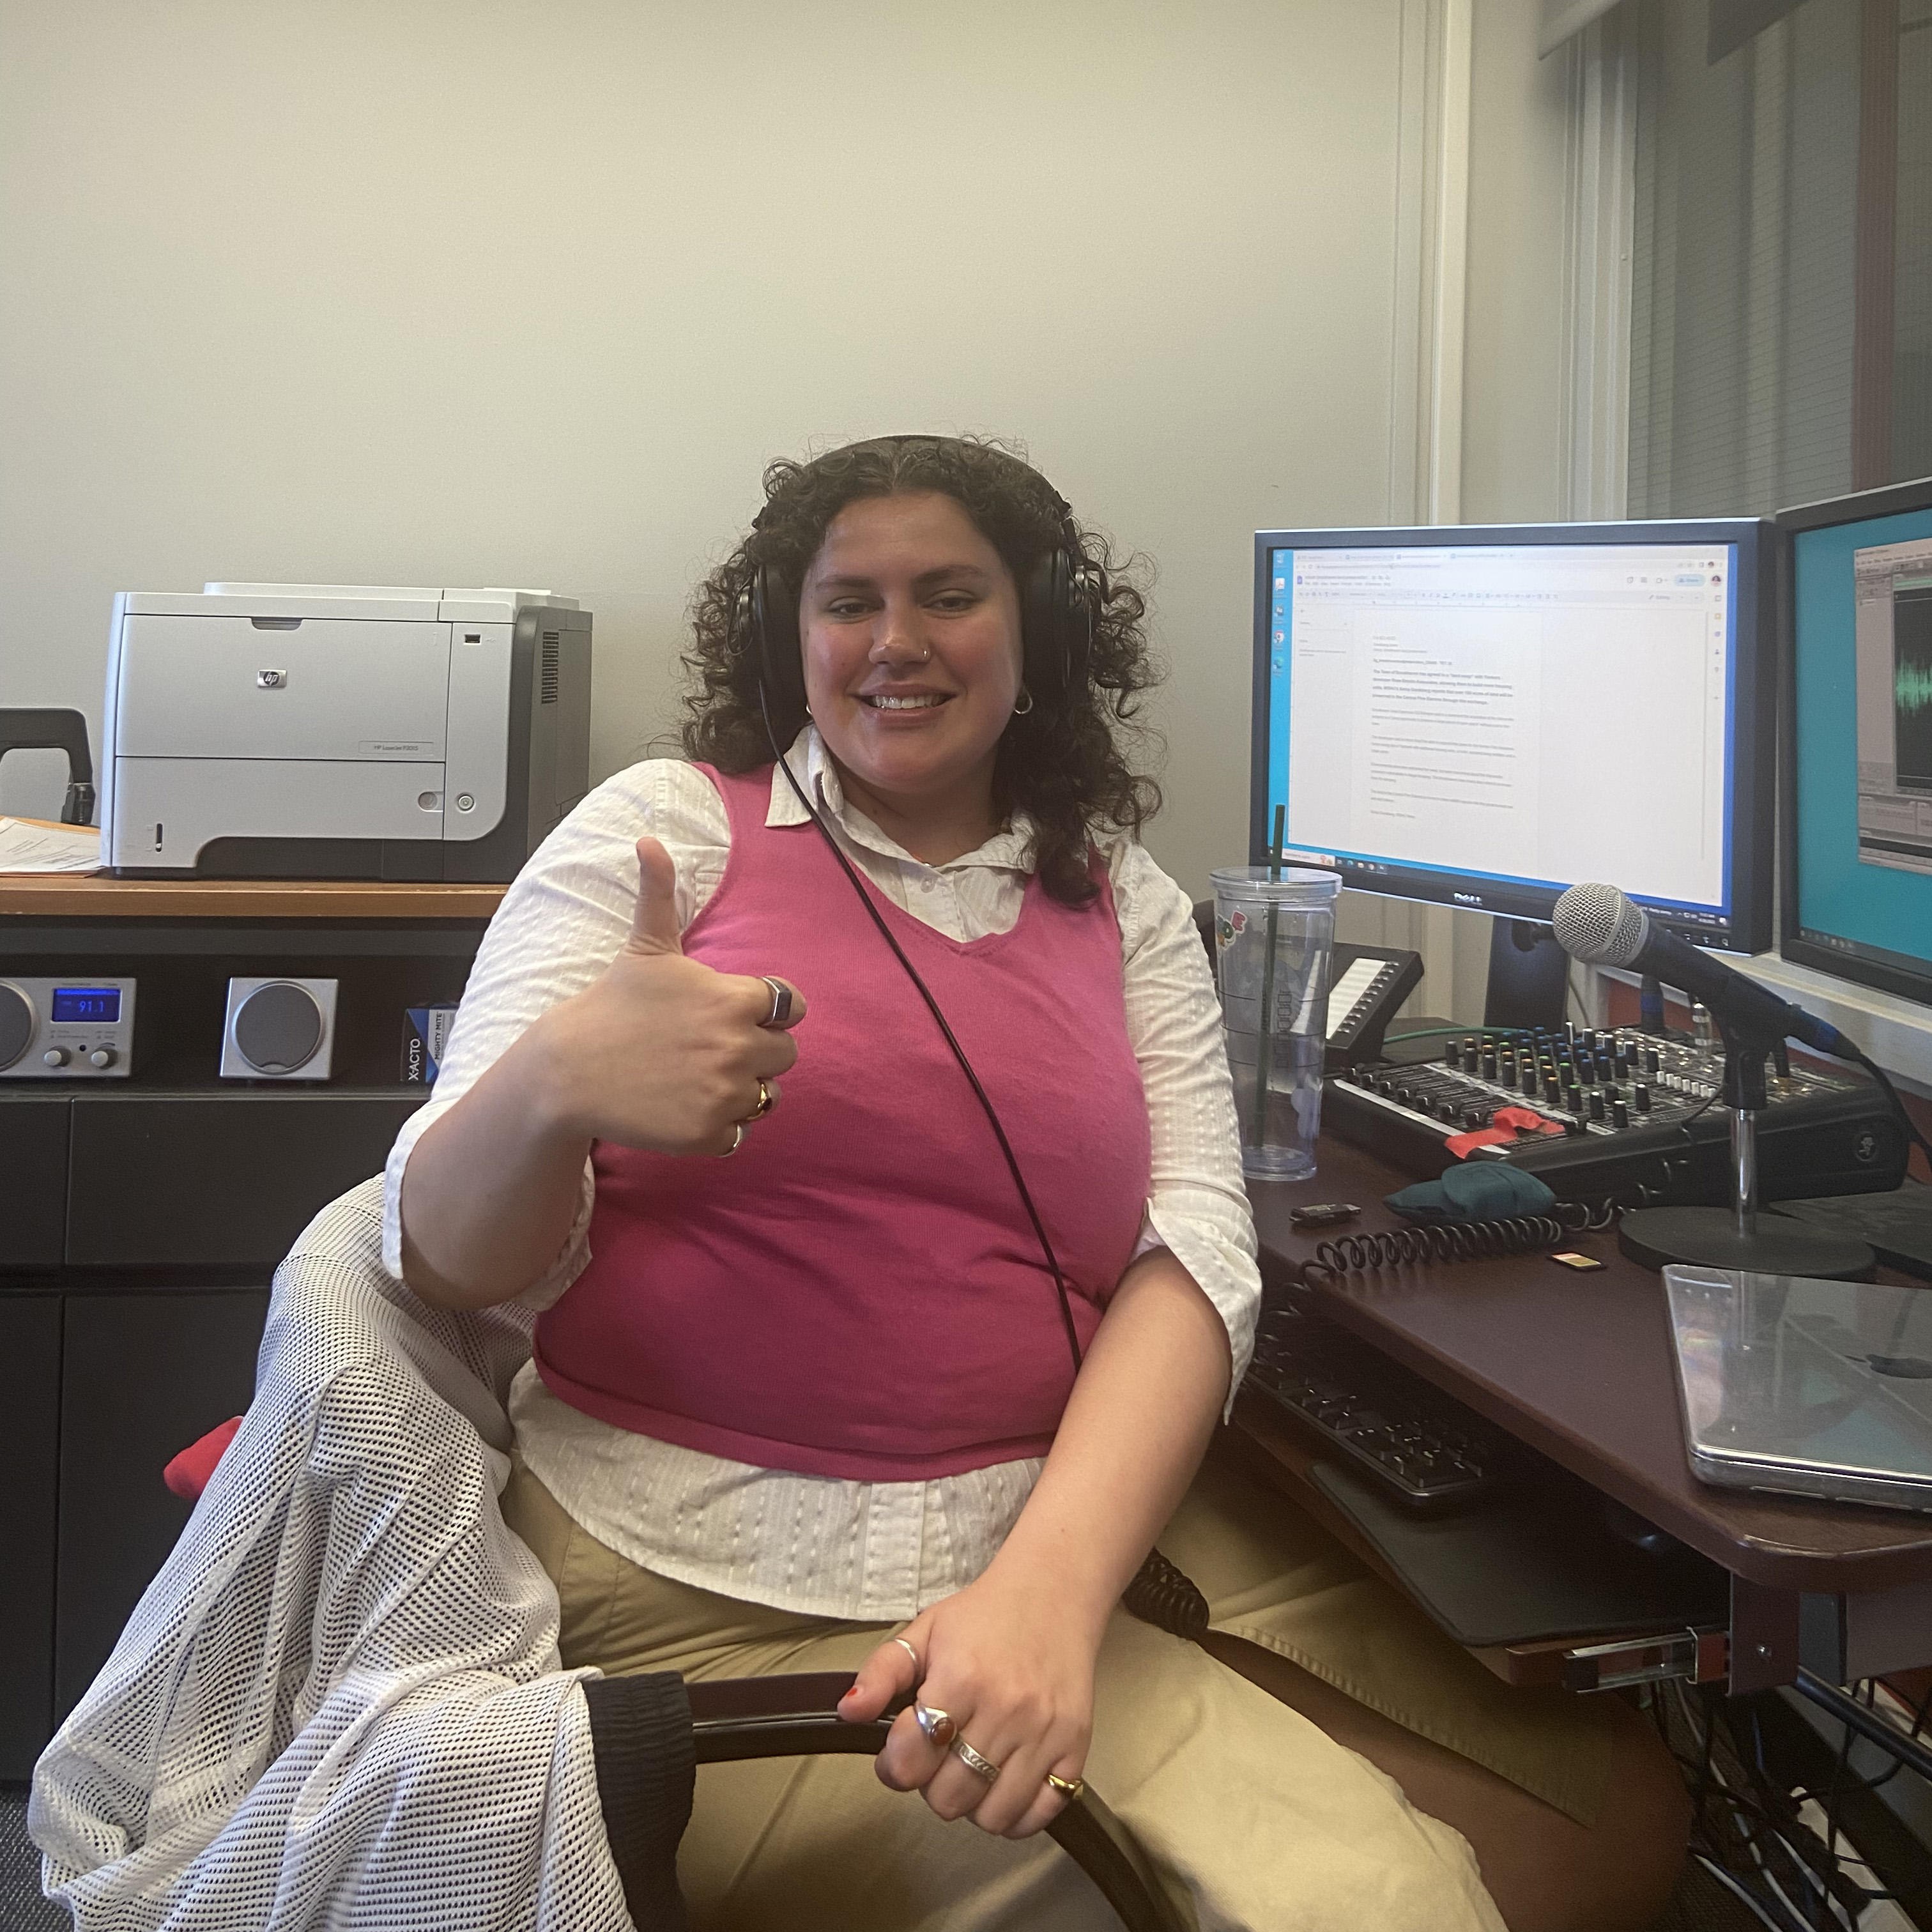 Xenia Gonikberg gives a thumbs up from her desk in the WSHU public radio bureau on campus